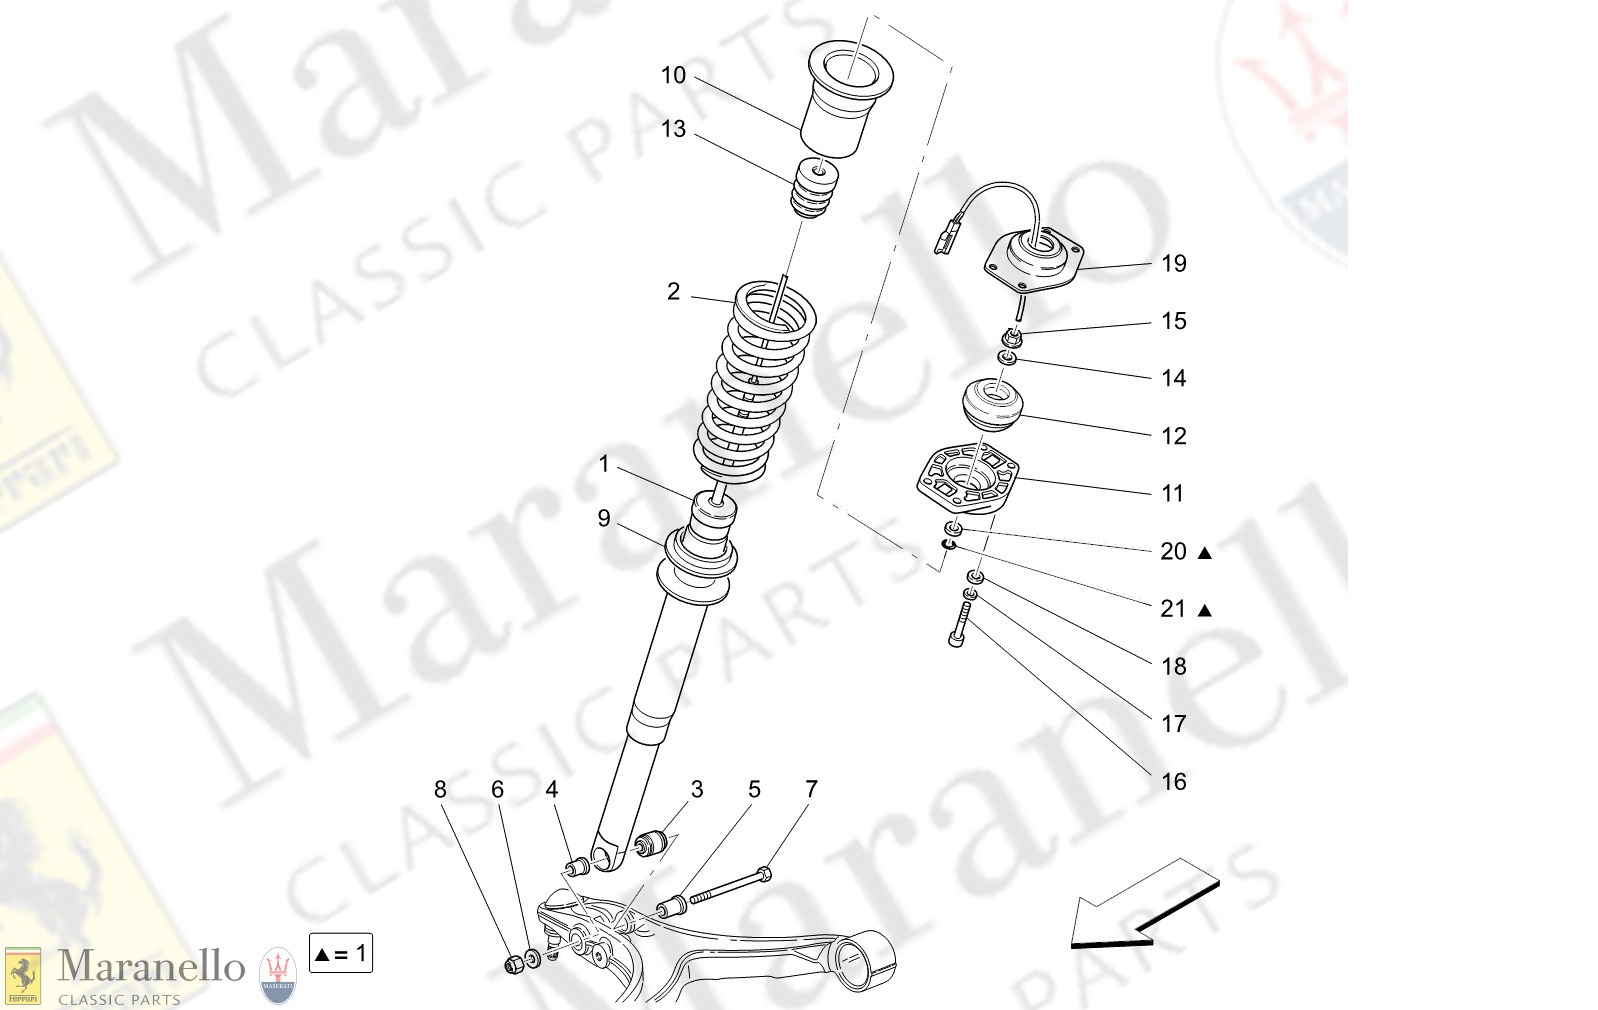 06.11 - 15 - 0611 - 15 Front Shock Absorber Devices